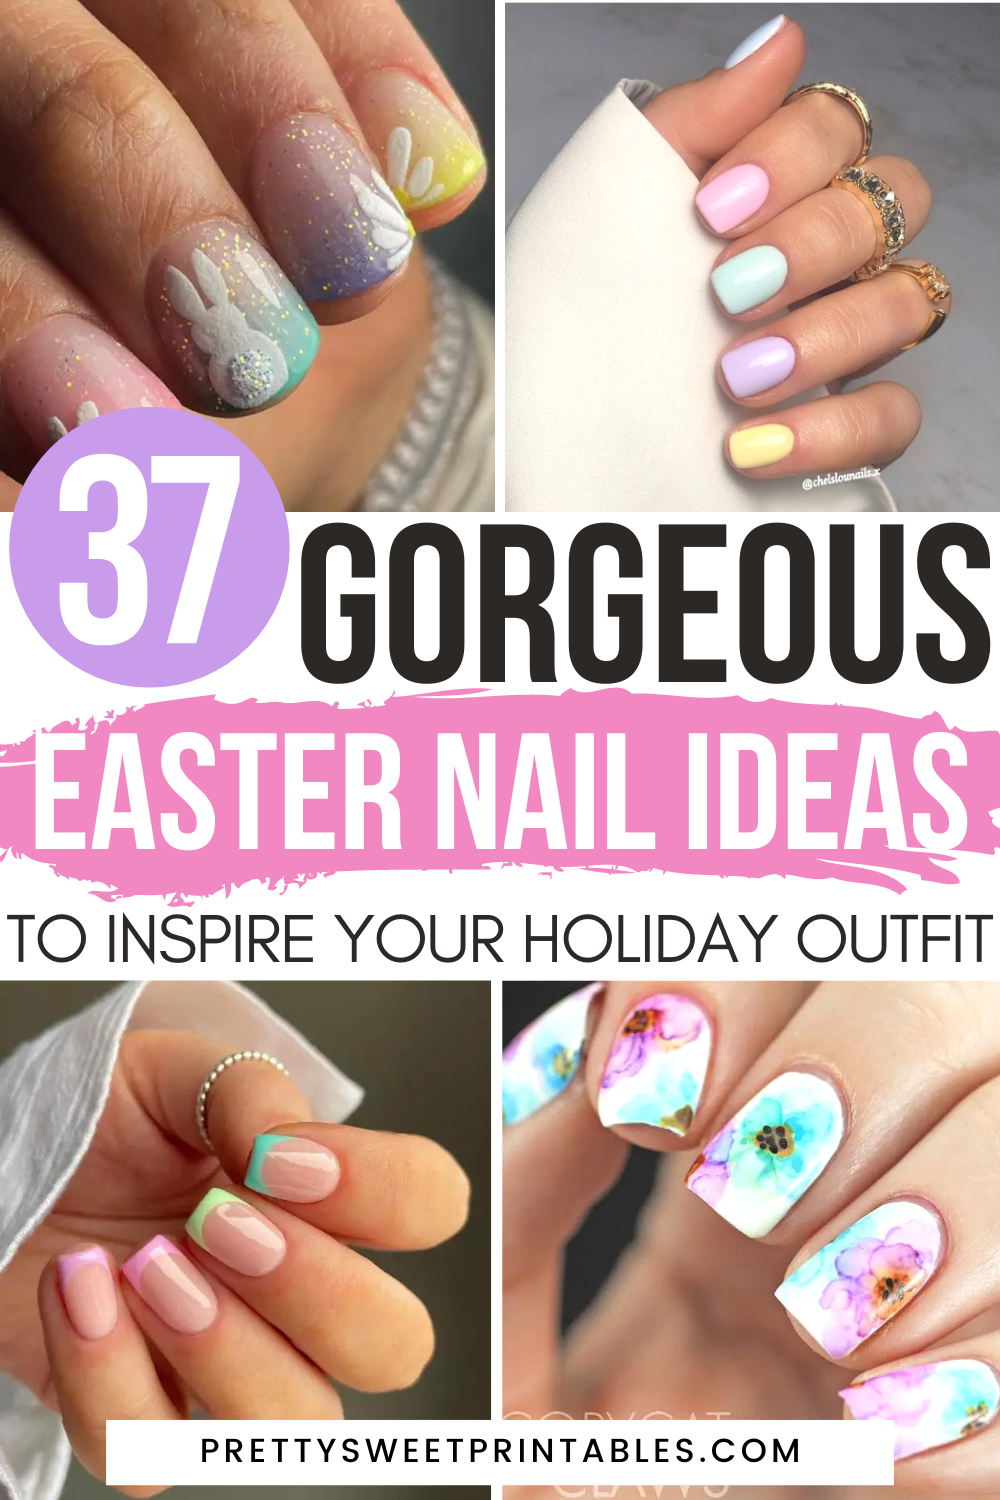 37 Easter Nail Ideas to Inspire Your Holiday Outfit - Pretty Sweet